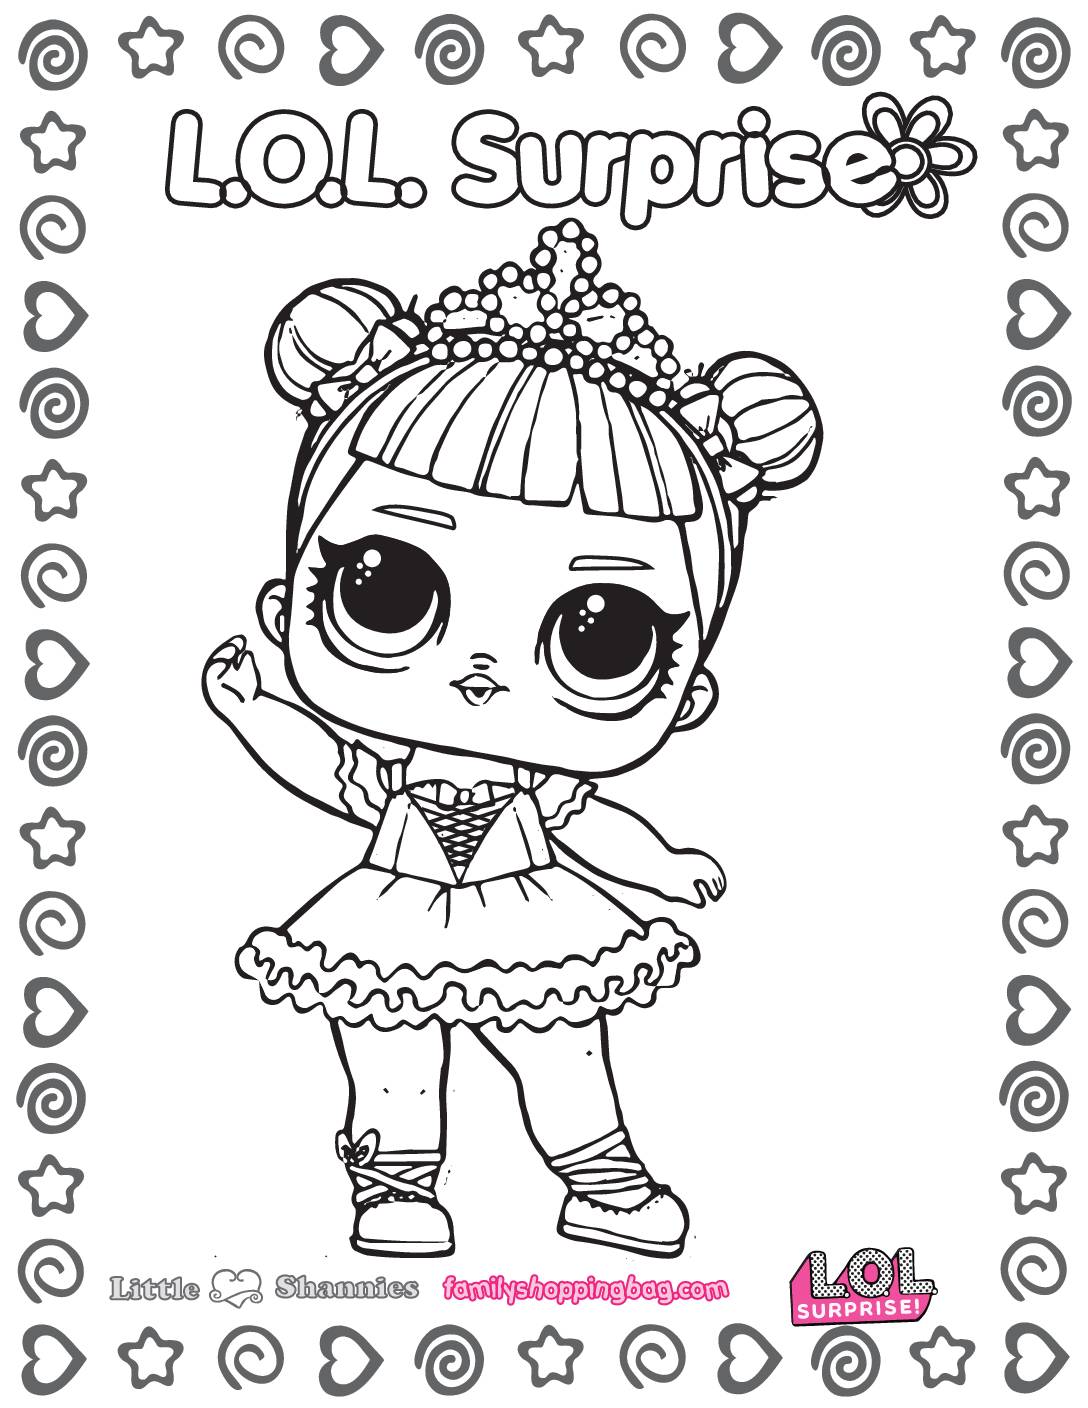 Lol Surprise Coloring Page 4 Coloring Pages